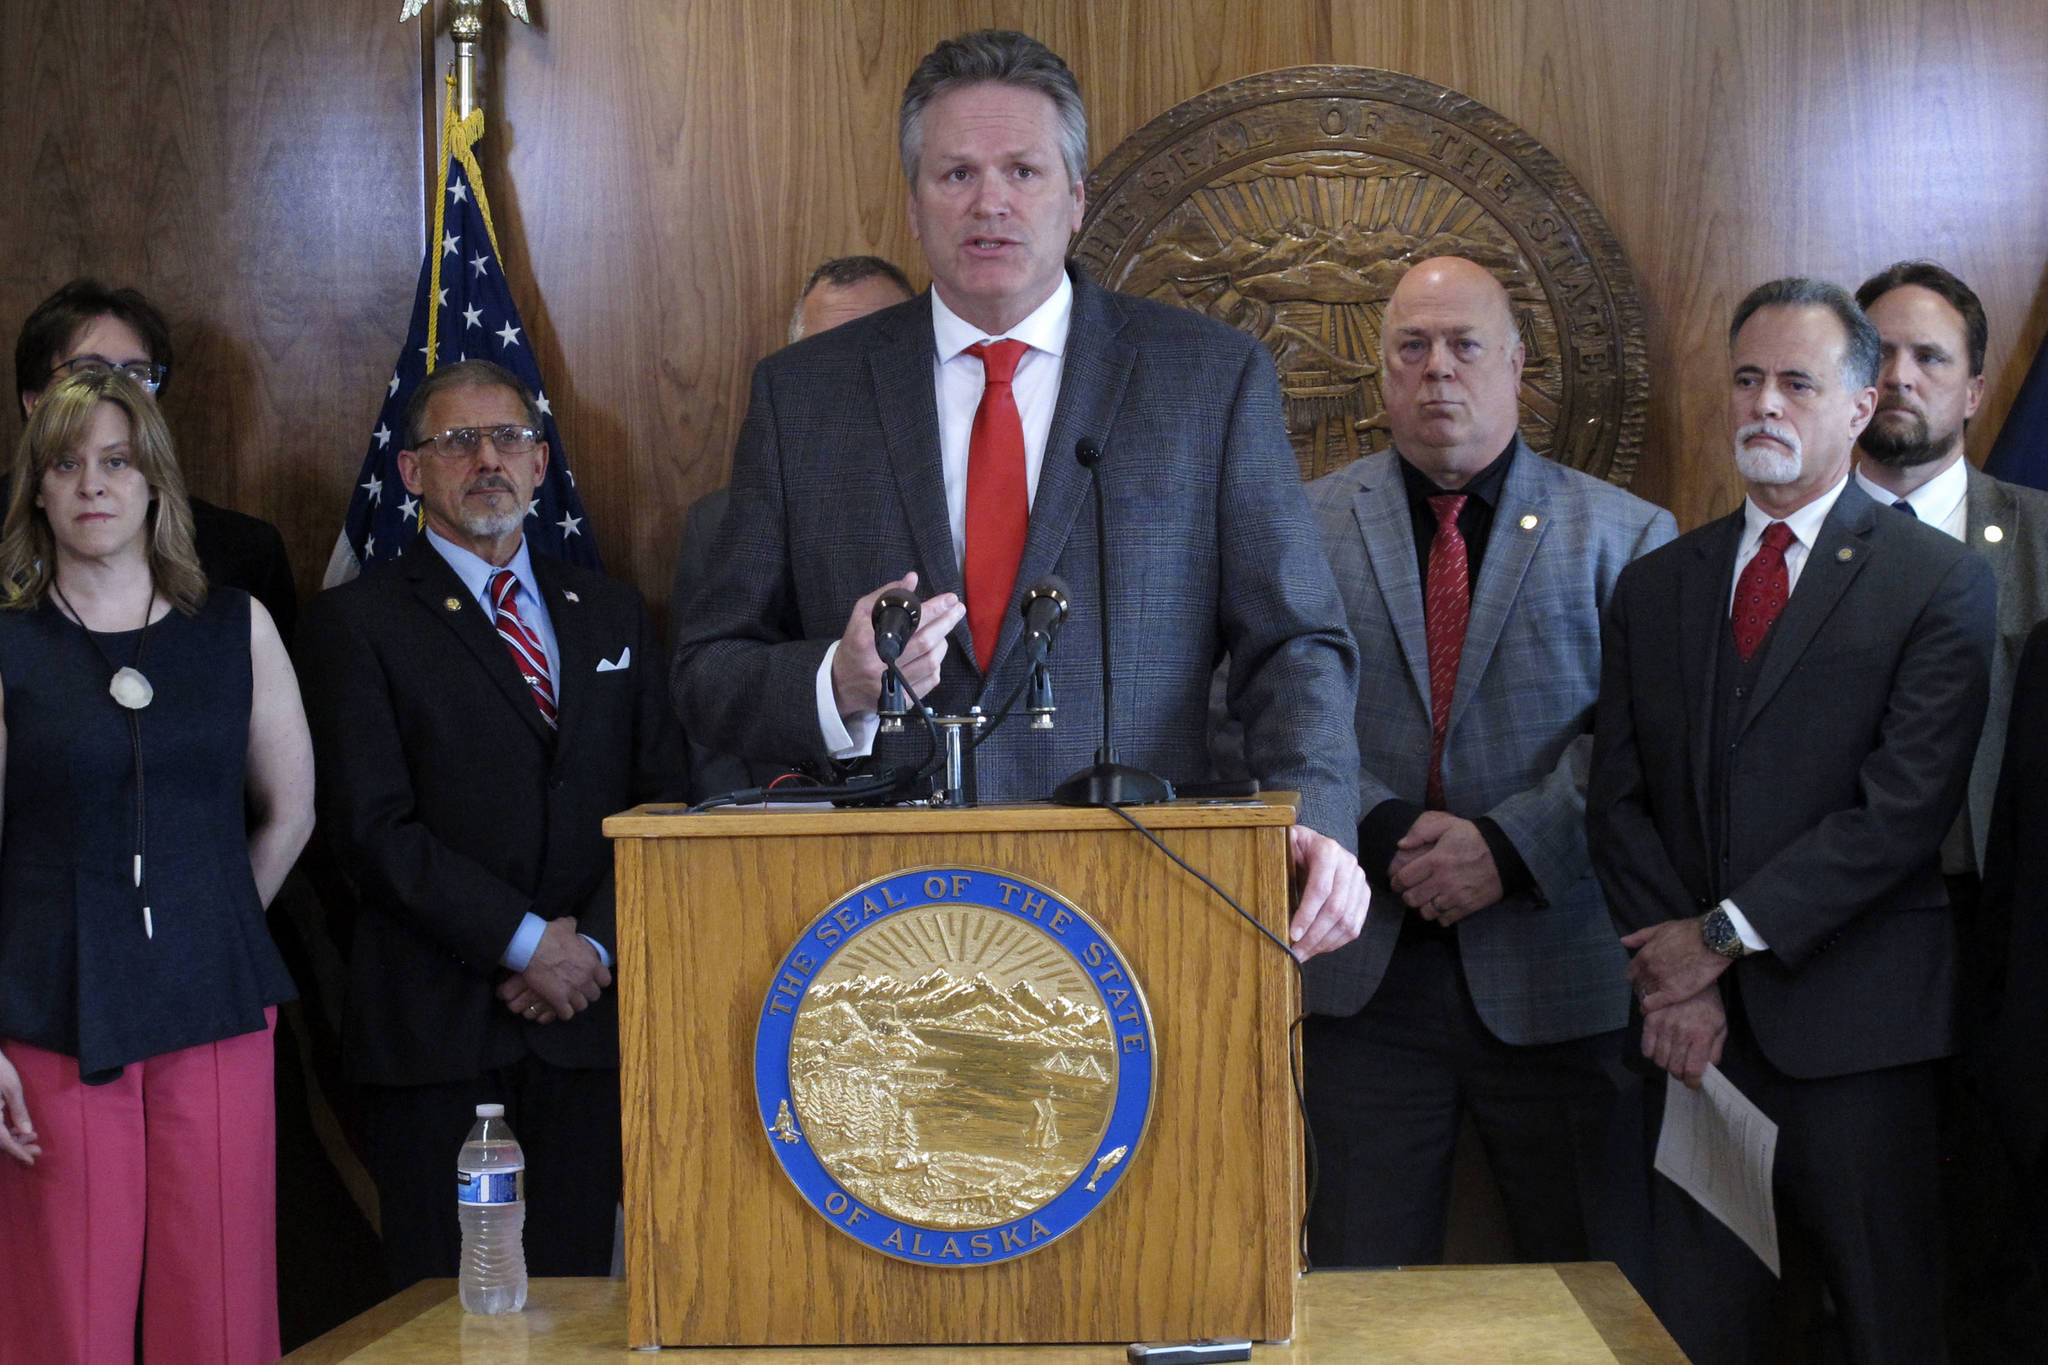 Alaska Gov. Mike Dunleavy speaks during a news conference on Wednesday, May 12, 2021, in Juneau, Alaska, with a number of state legislators around him. Dunleavy discussed a proposed constitutional amendment dealing with the Alaska Permanent Fund and the Permanent Fund dividend. (AP Photo/Becky Bohrer)